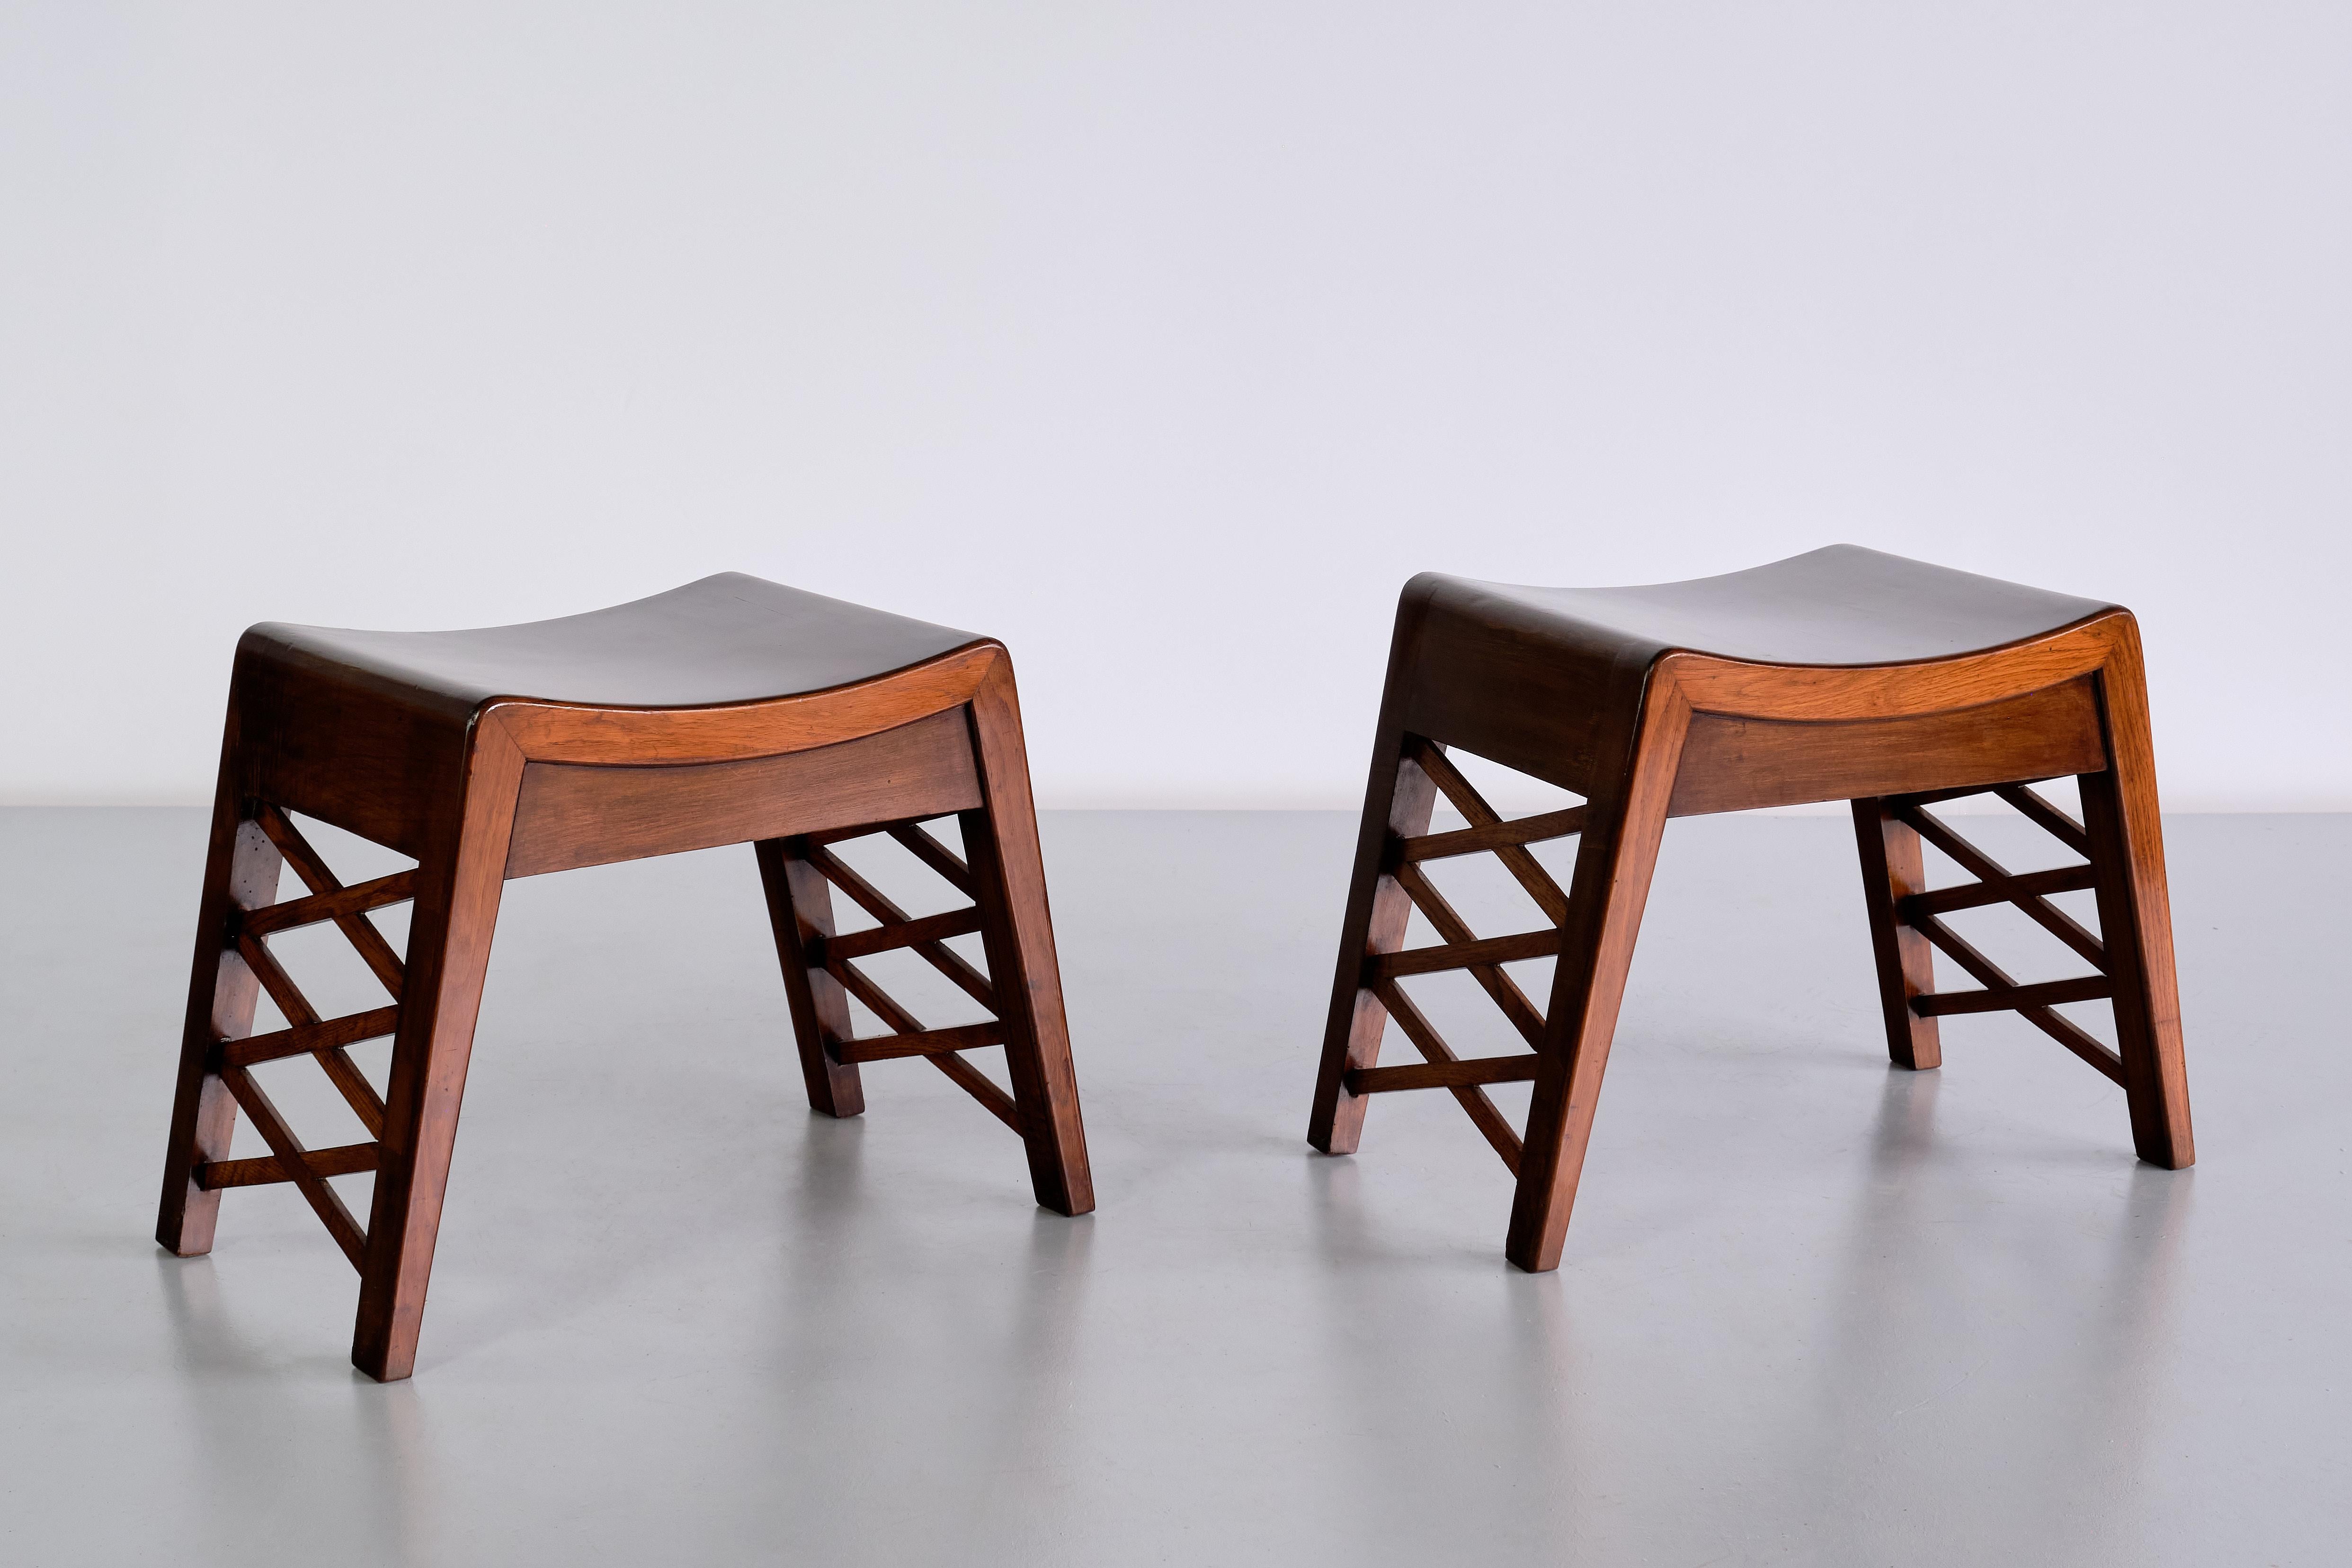 Piero Portaluppi Attributed Pair of Stools in Chestnut Wood, Italy, Late 1930s For Sale 9